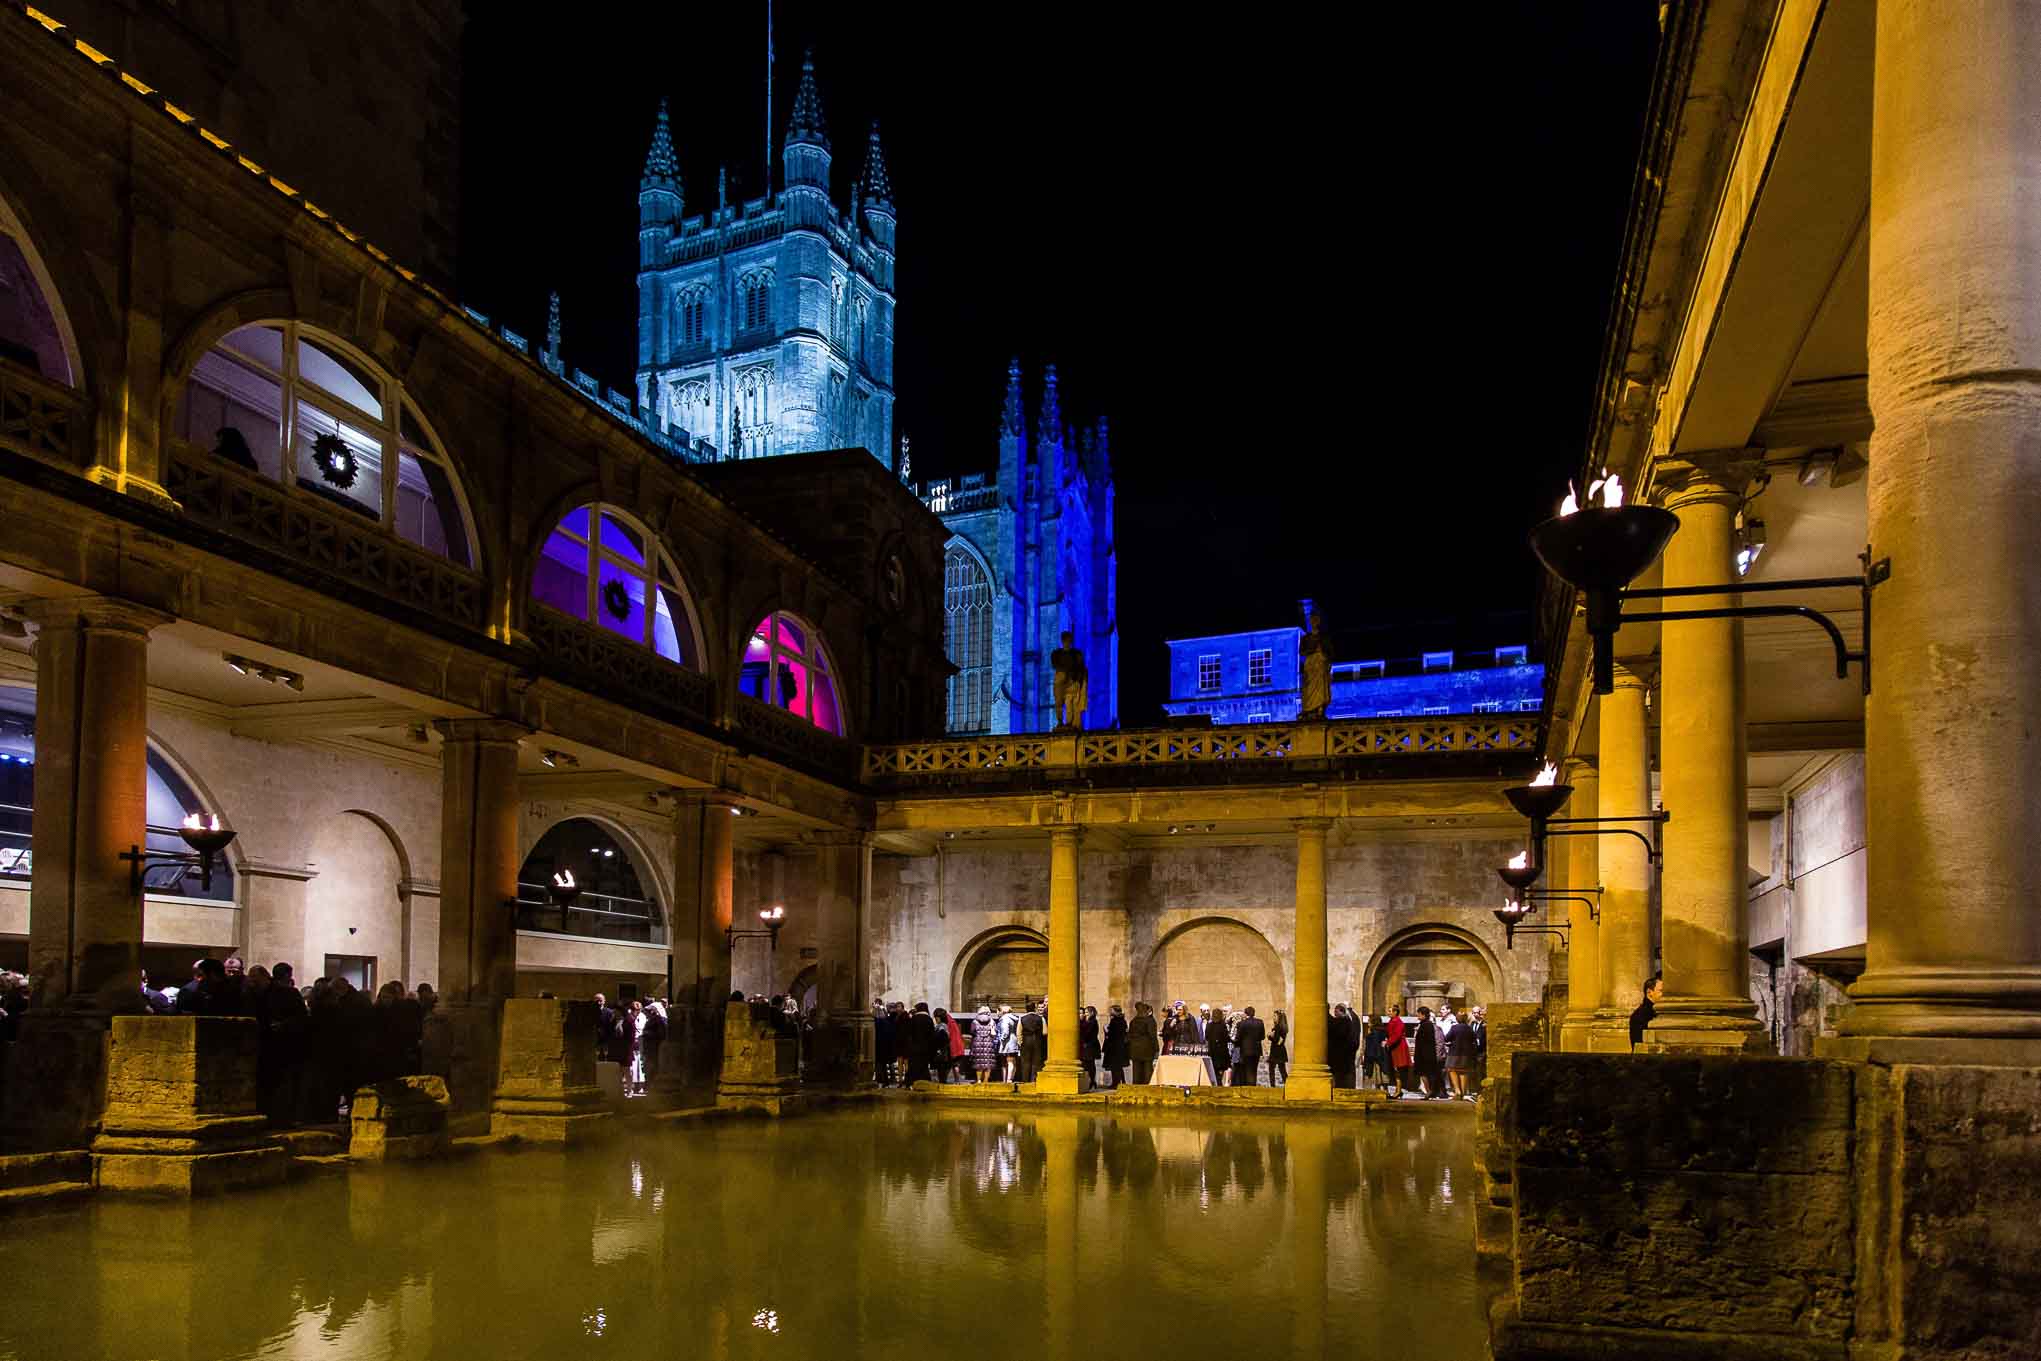 Drinks reception beside the Great Bath at the Roman Baths